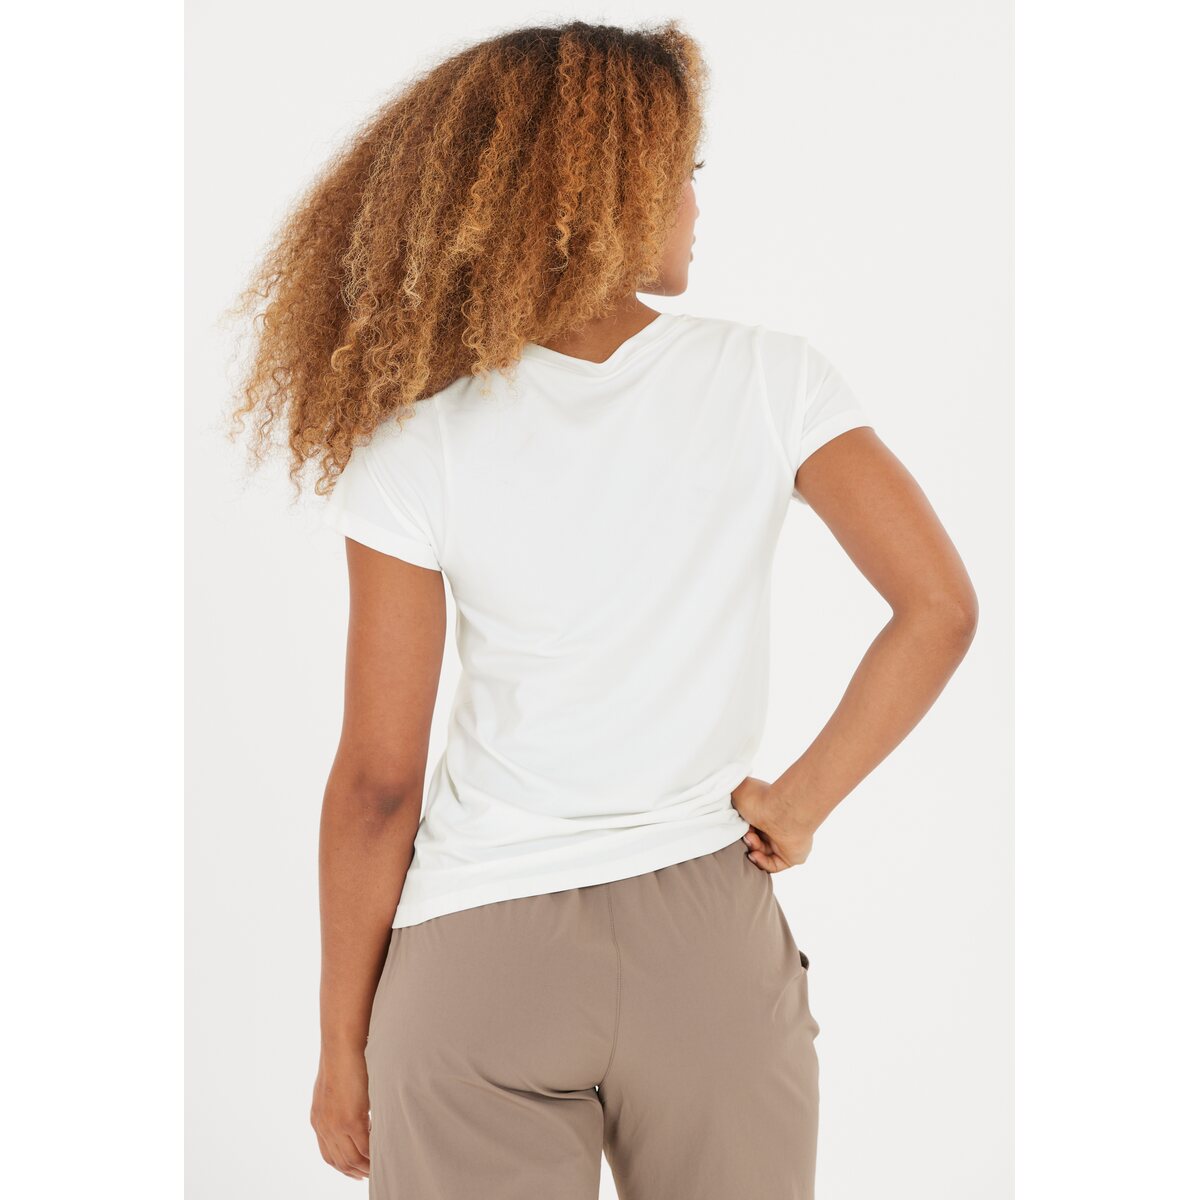 Athlecia Julee Womenswear Loose Fit Seamless Tee - White 2 Shaws Department Stores